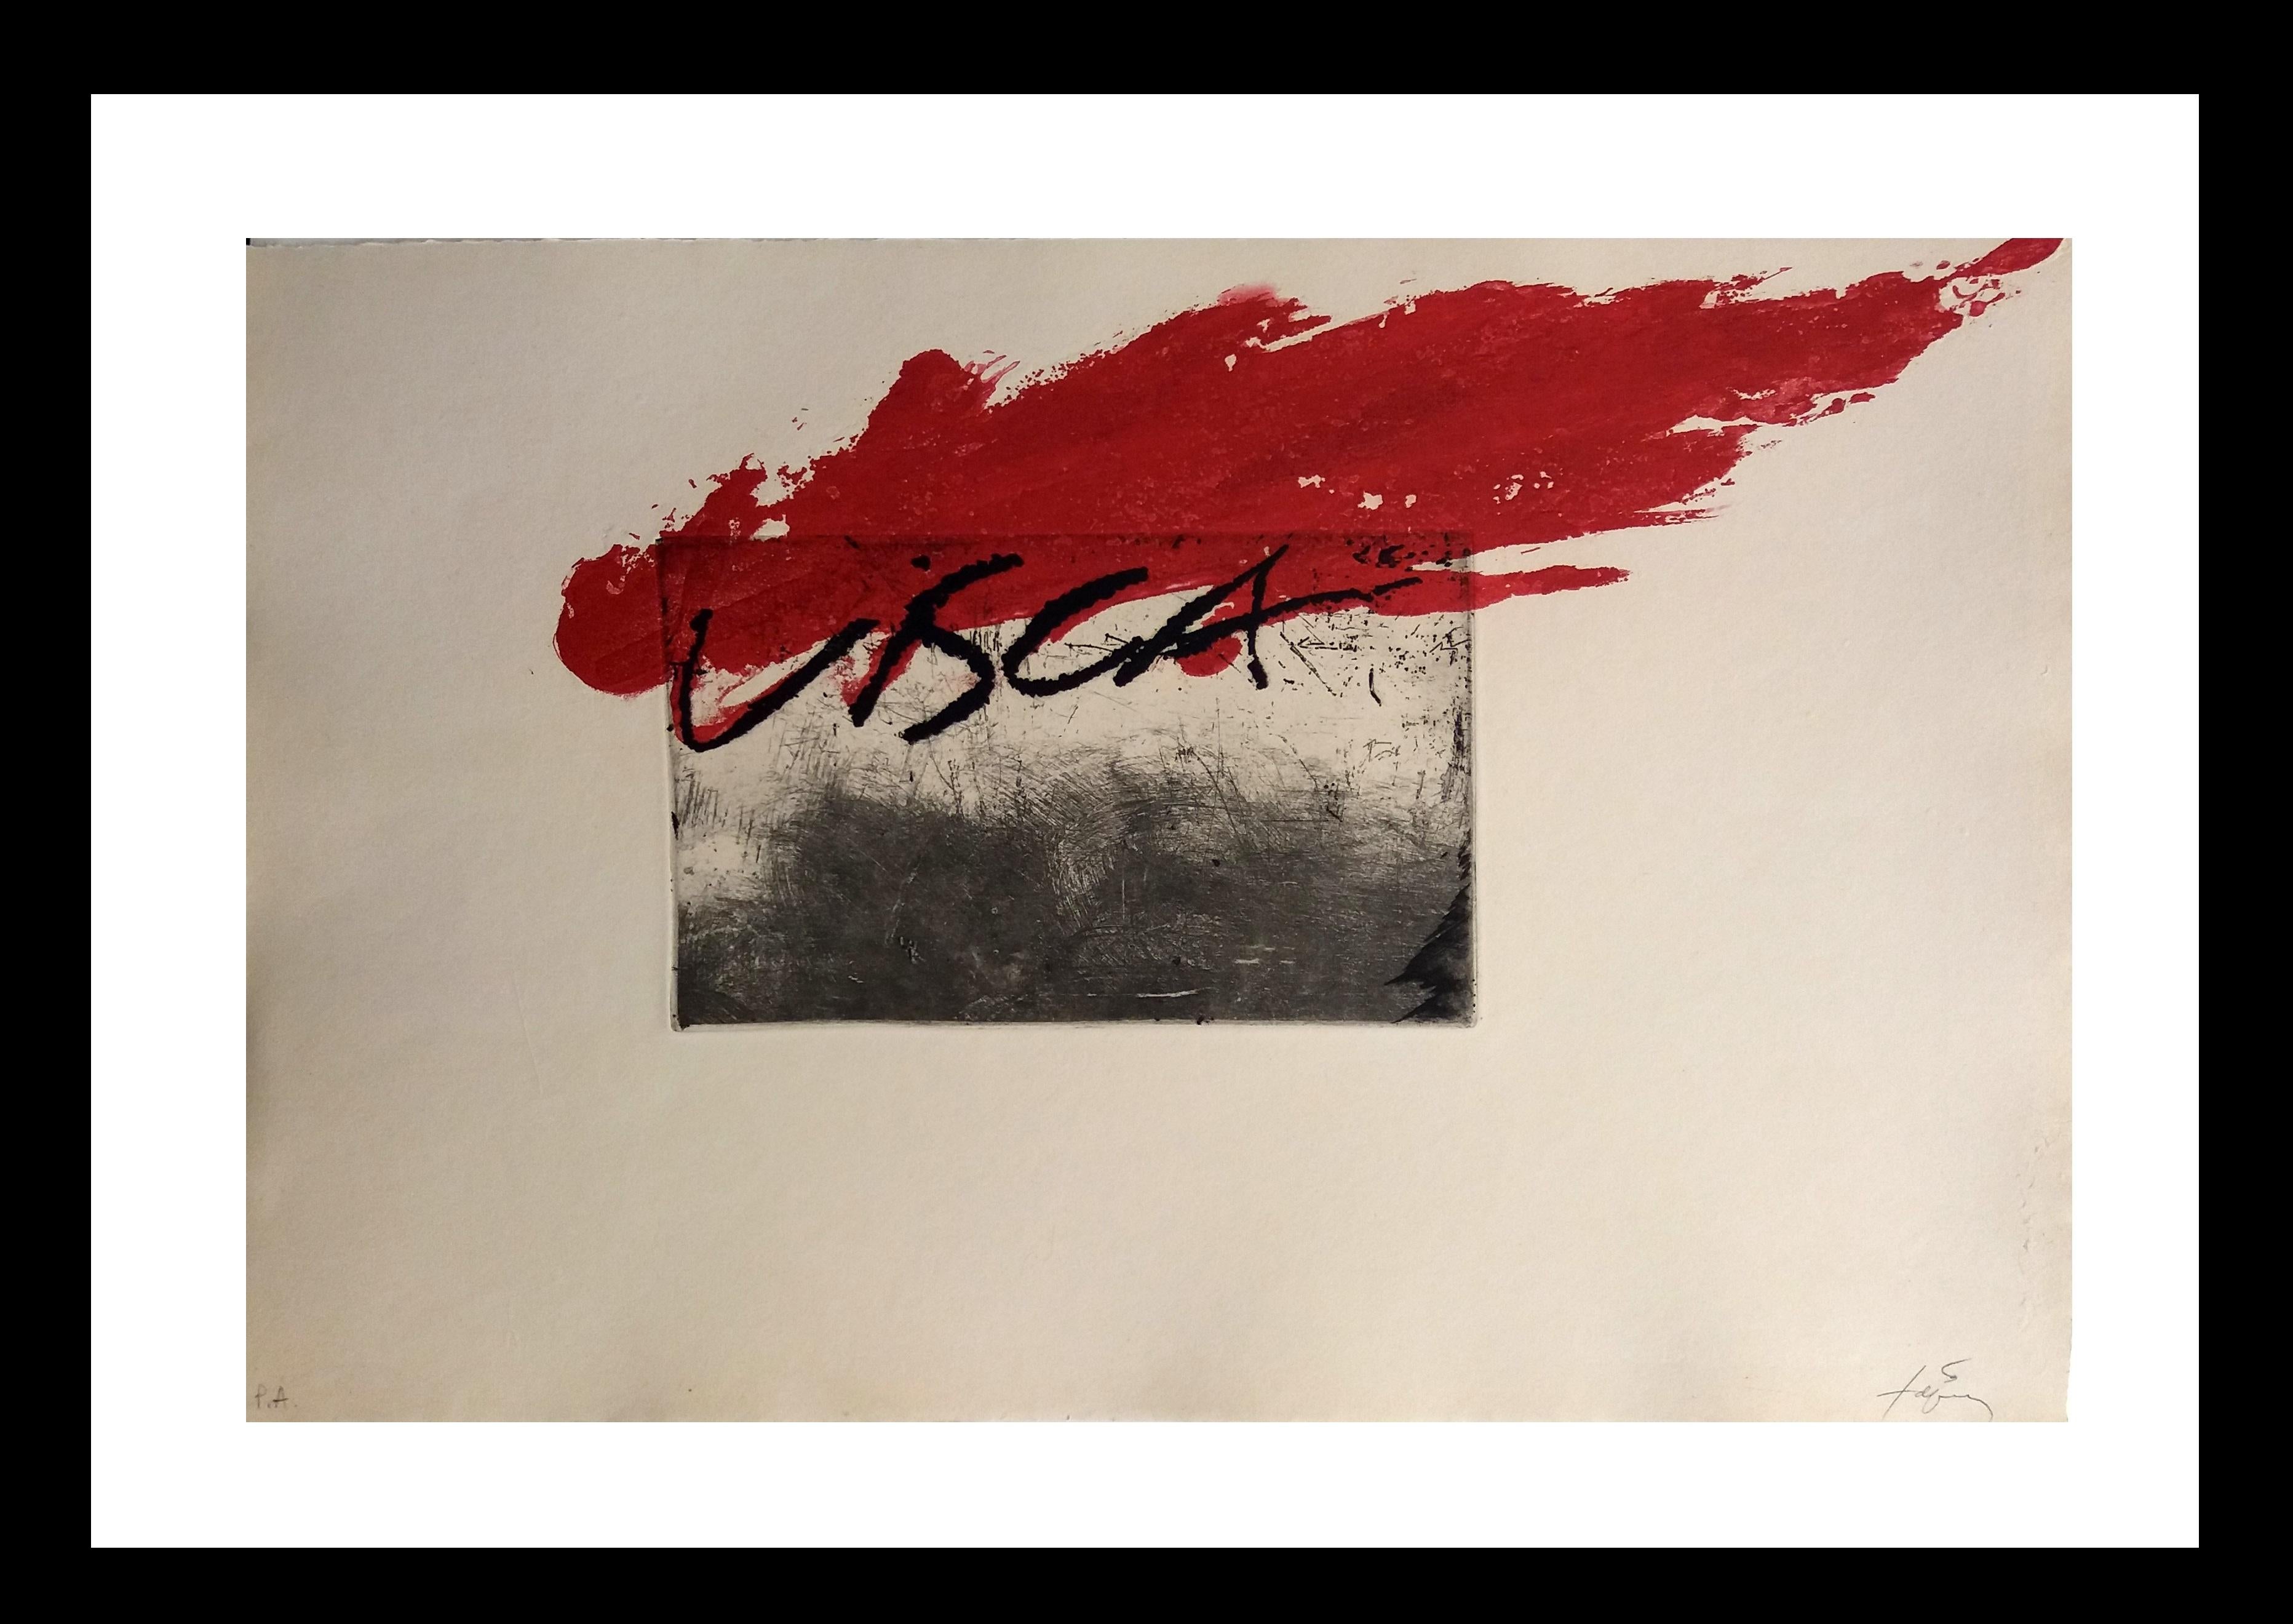 Tapies  Red  Visca original engraving abstract paintiong - Print by Antoni Tàpies